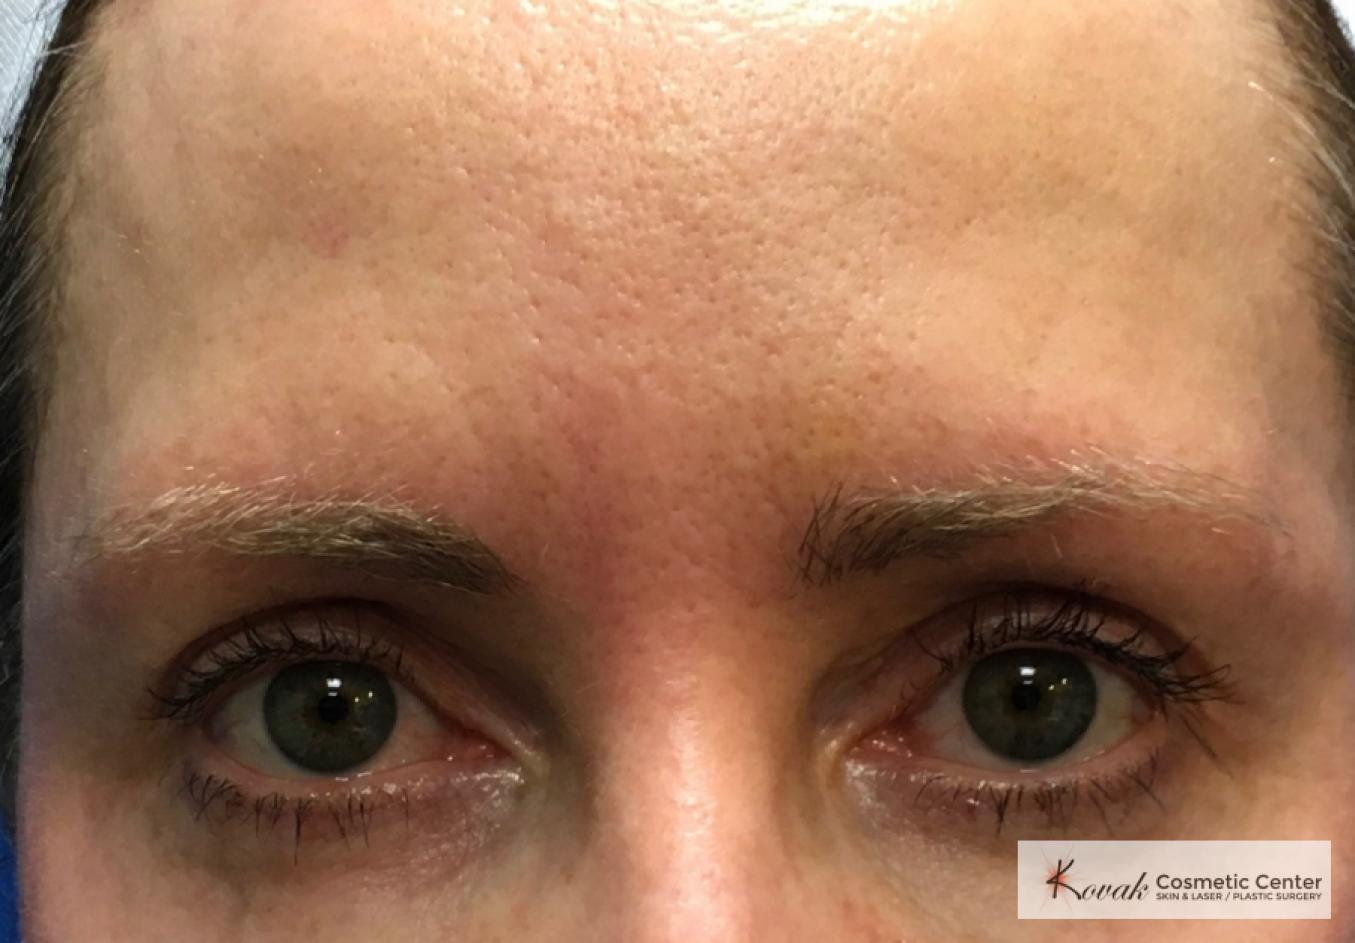 Upper eyelid treatment using Agnes on a 49 year old woman - Before 